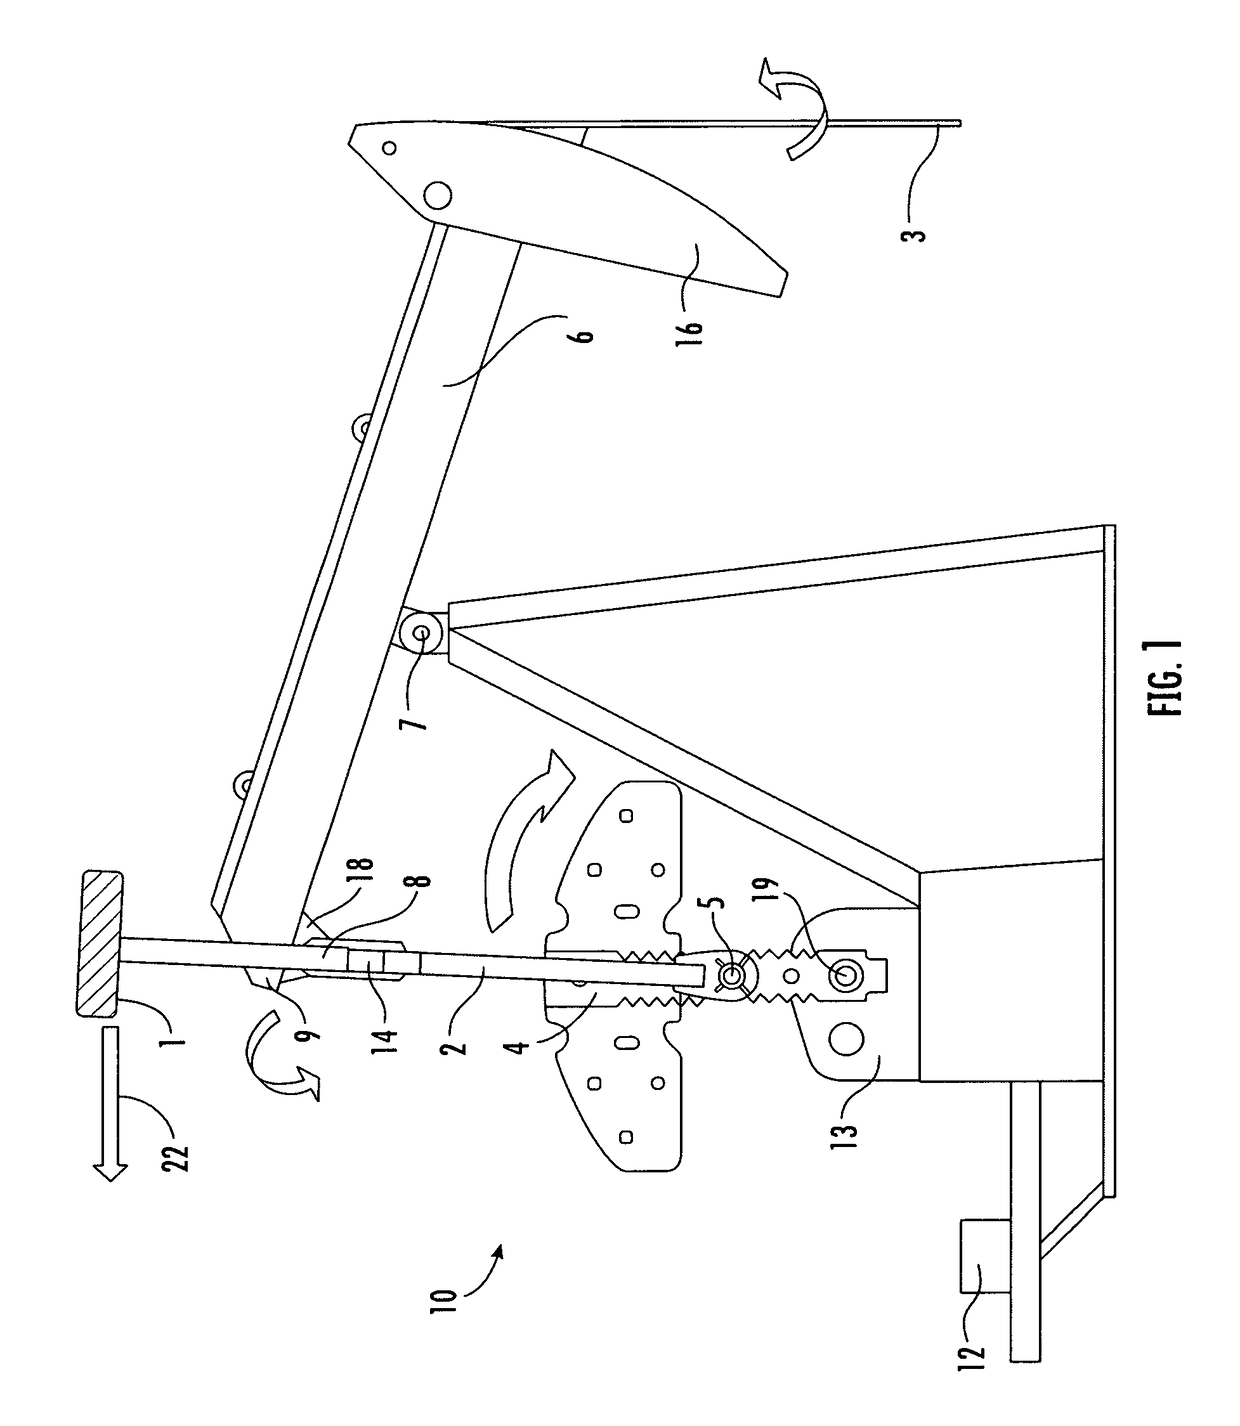 Articulated reciprocating counterweight